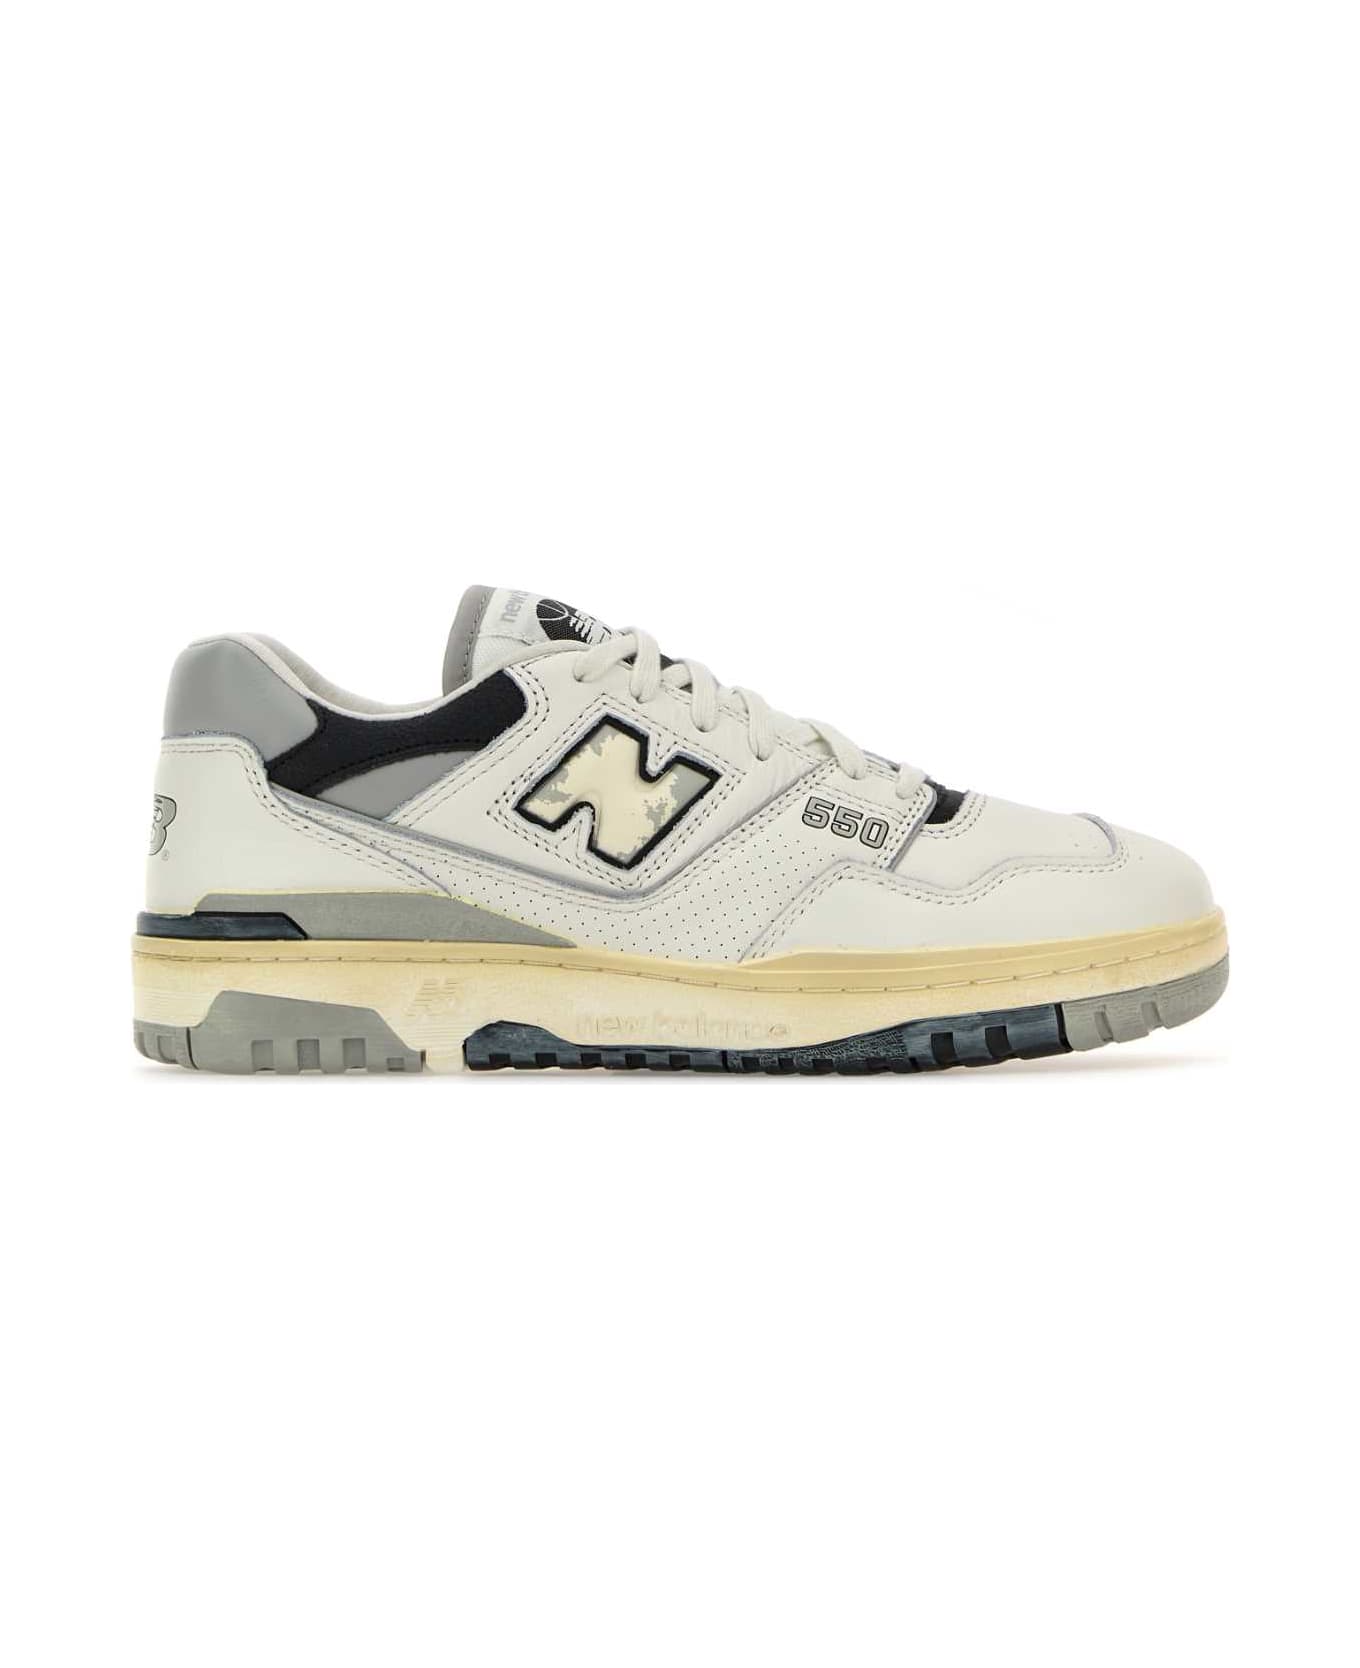 New Balance Multicolor Leather 550 Sneakers - OFFWHITEGREY